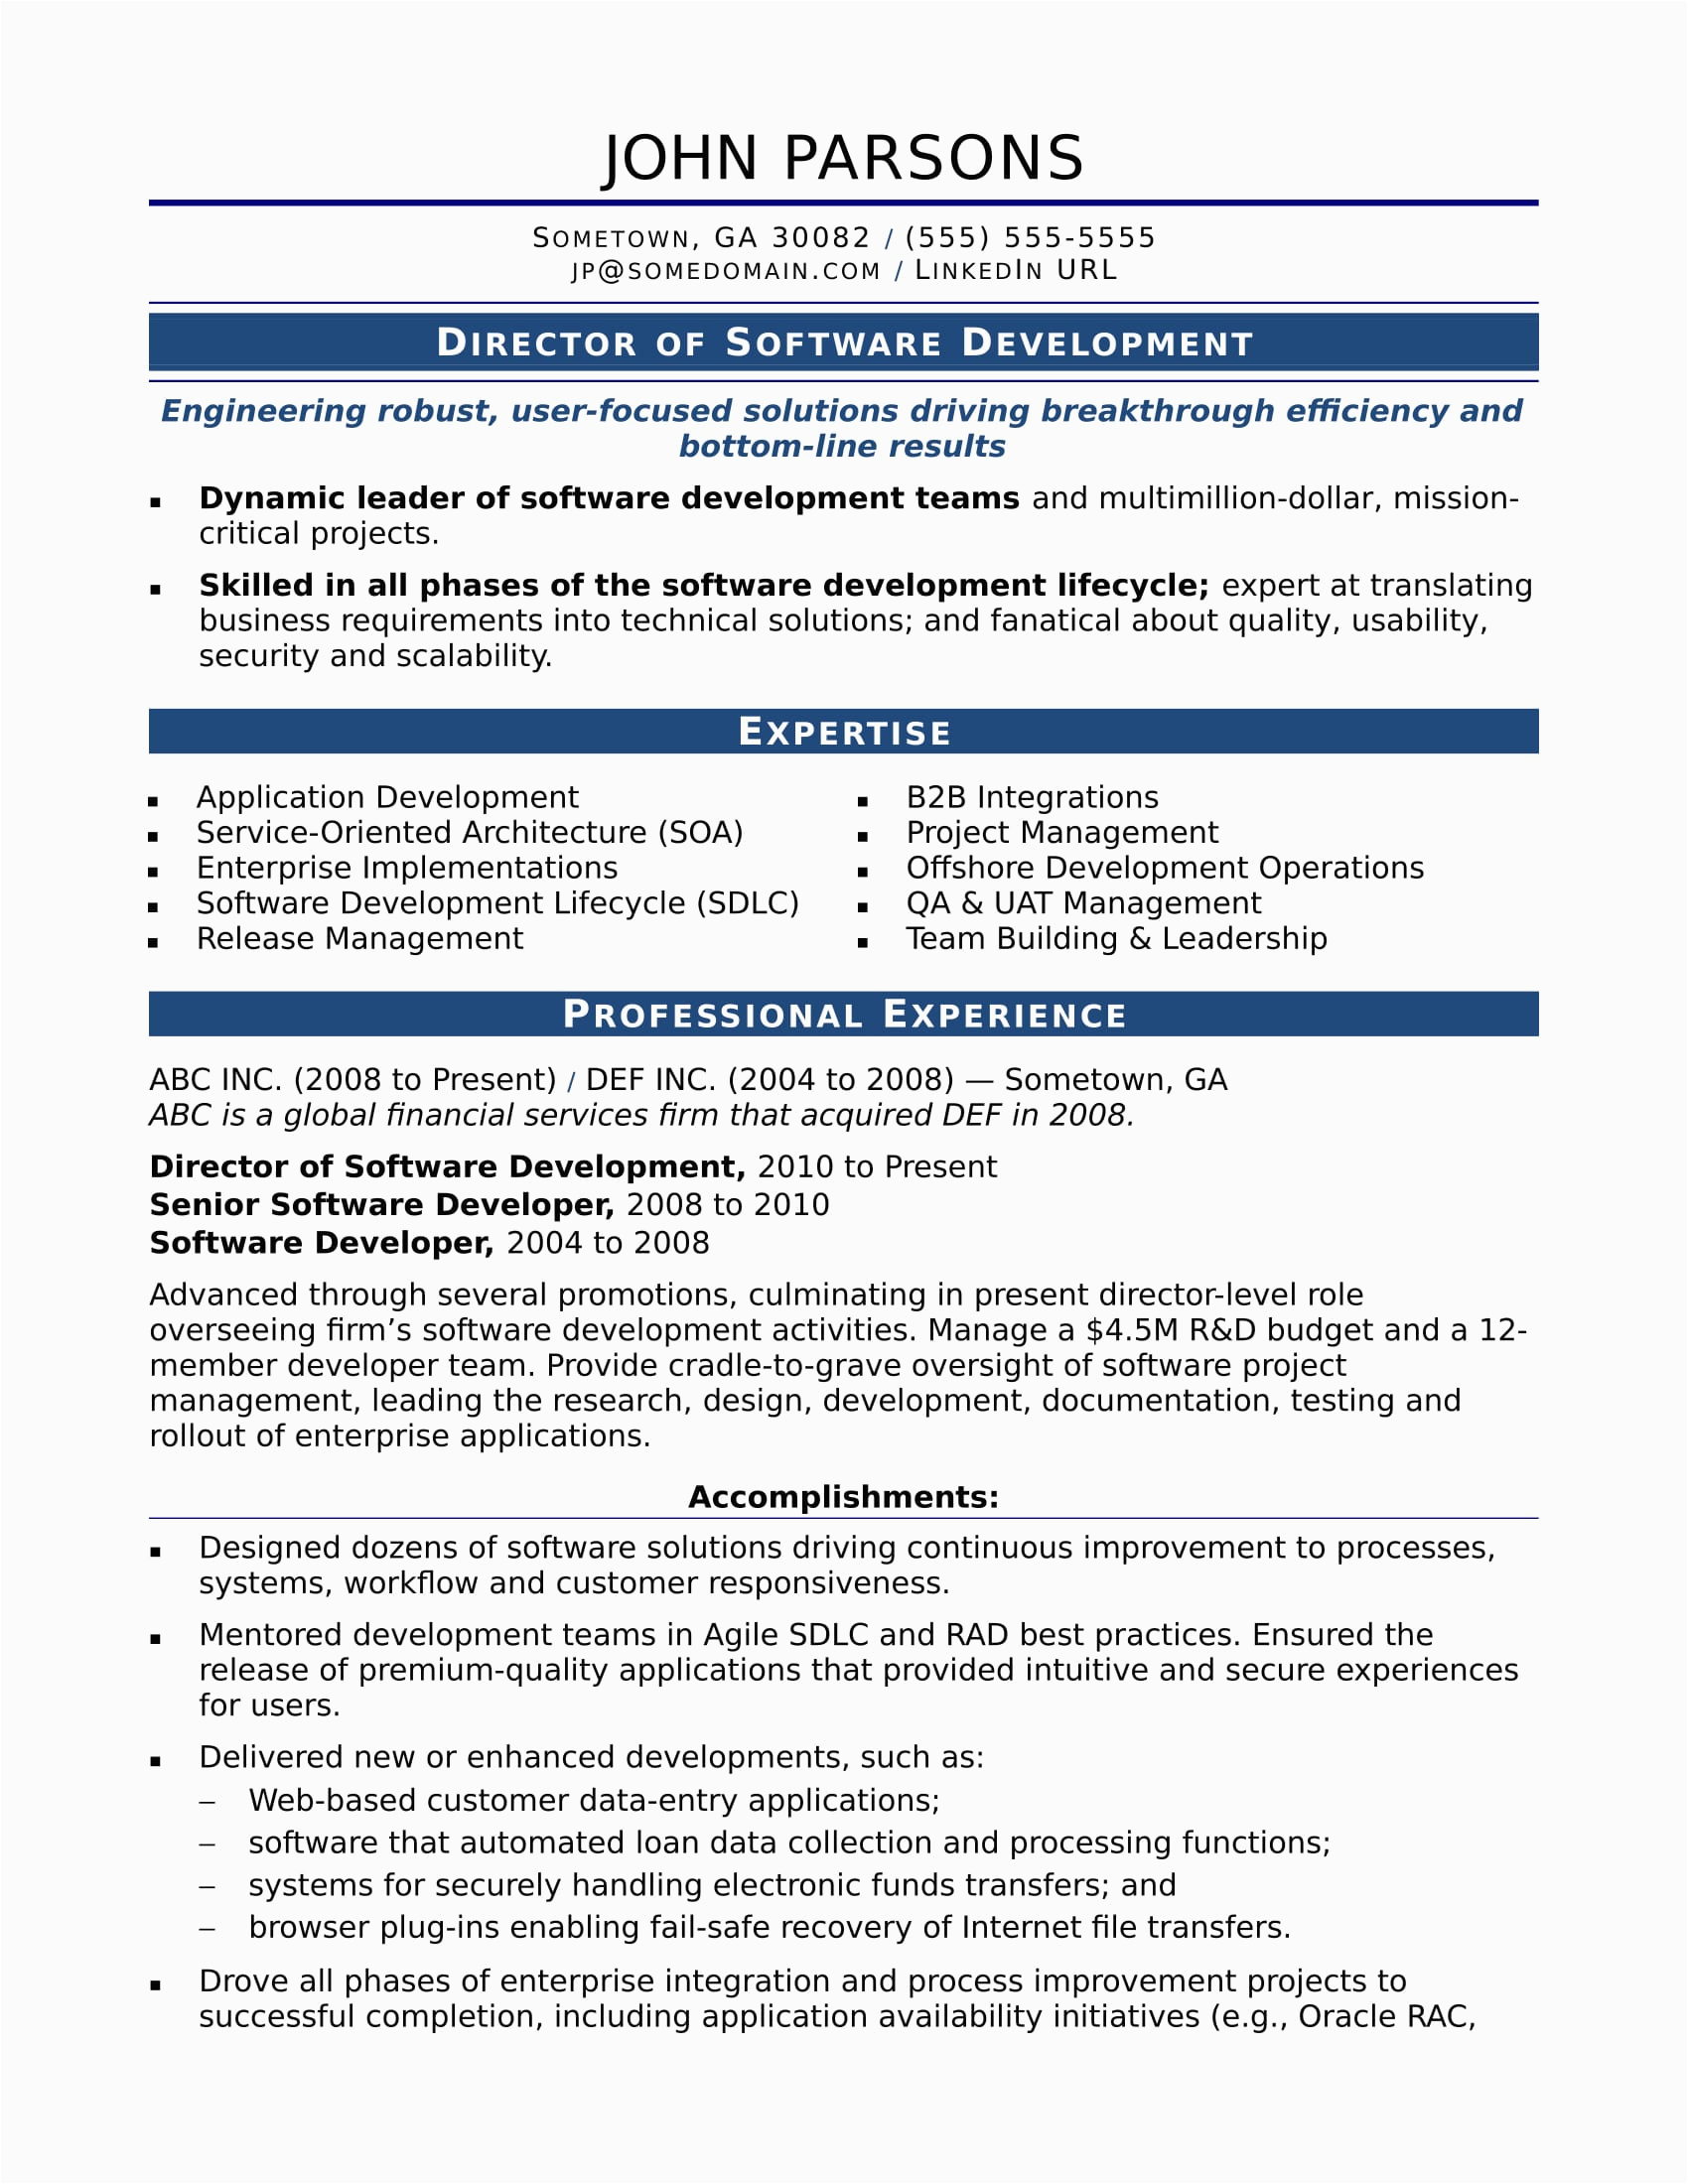 Sample Resume format for Experienced Person Sample Resume for An Experienced It Developer